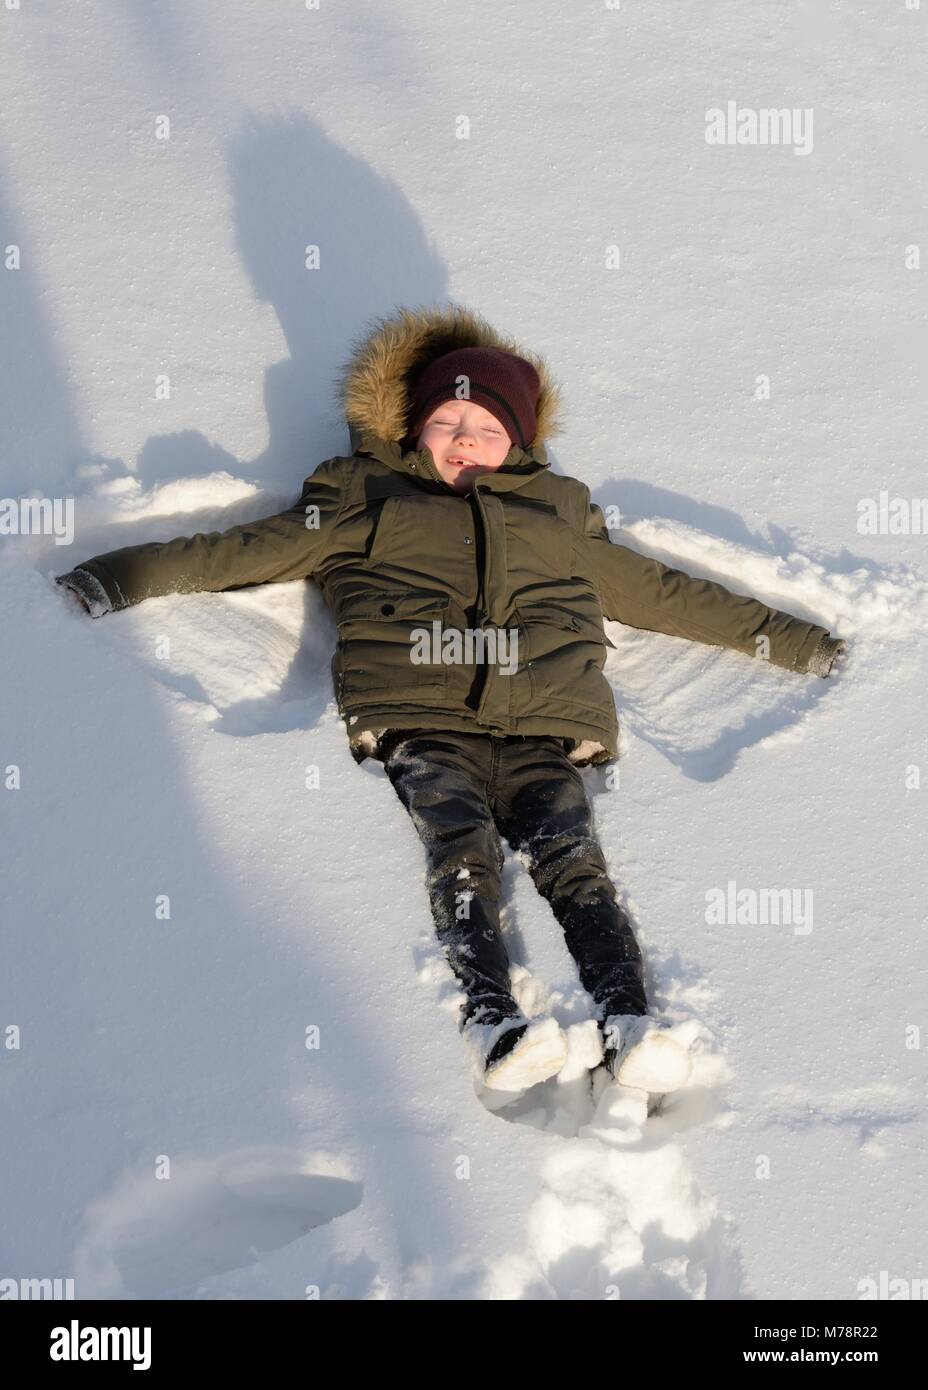 A young boy lying on his back in deep snow making angel wings shot from above. Stock Photo